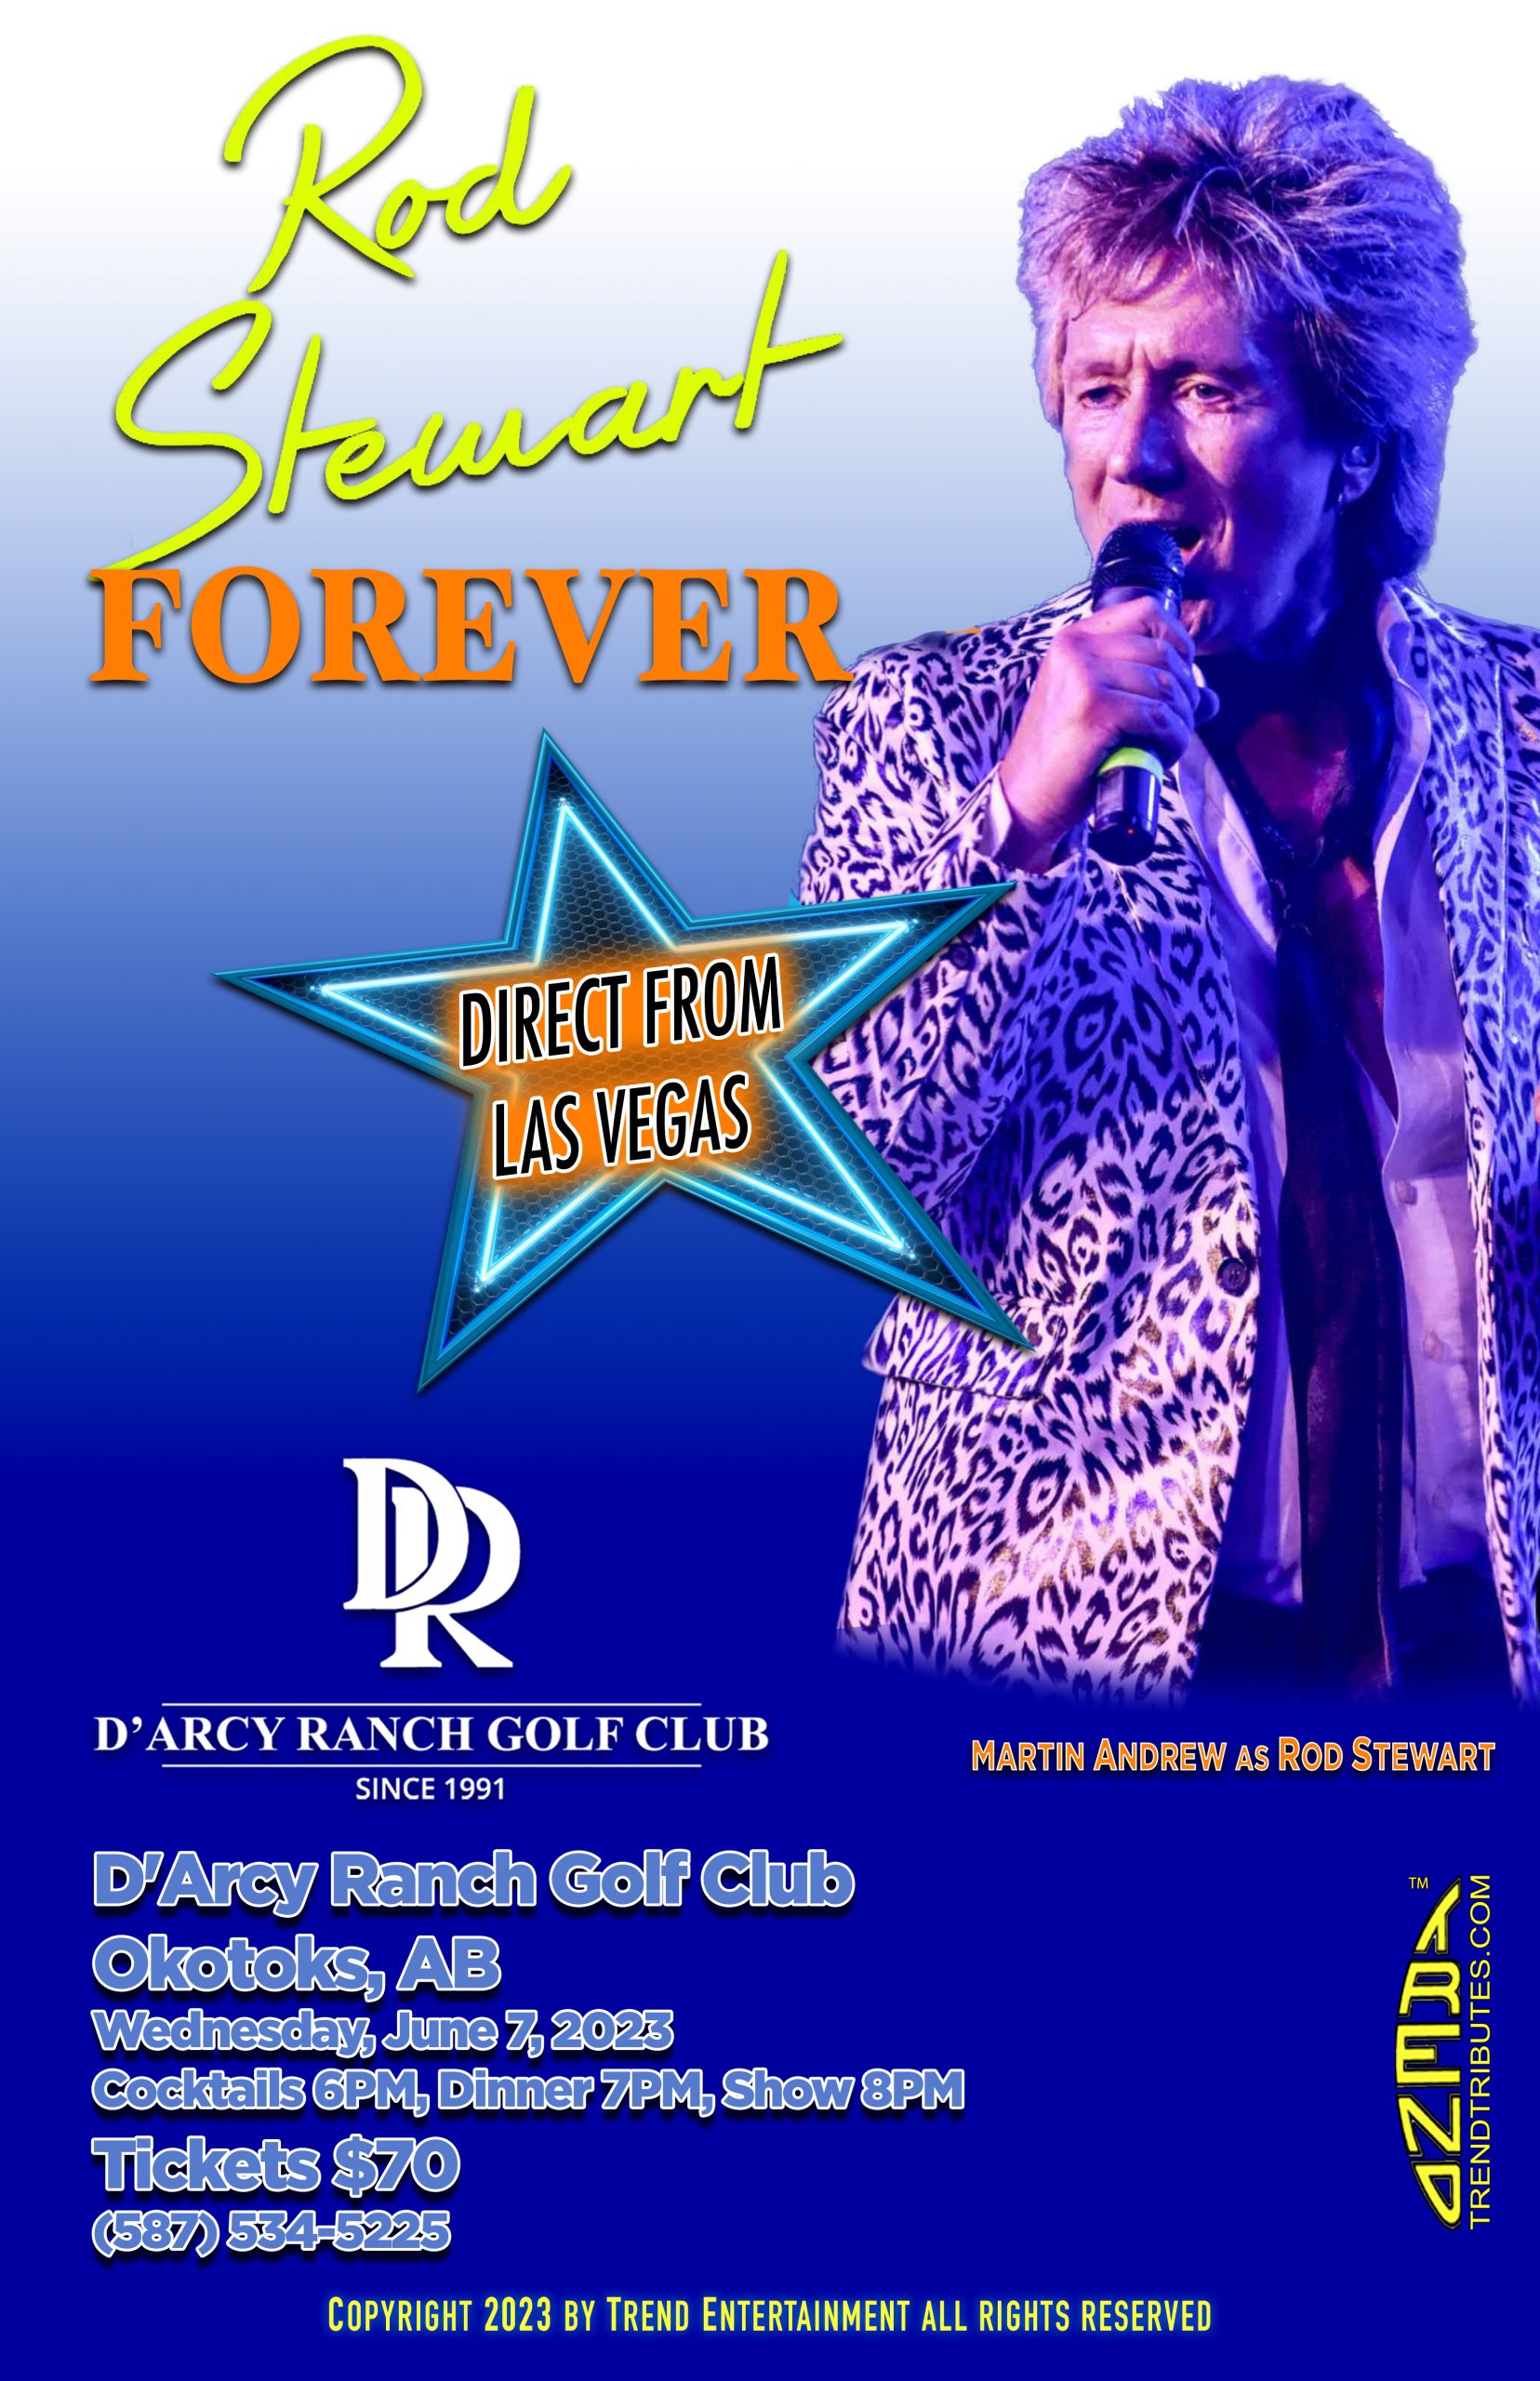 ROD STEWART FOREVER DARCY RANCH POSTER, 11 X 17